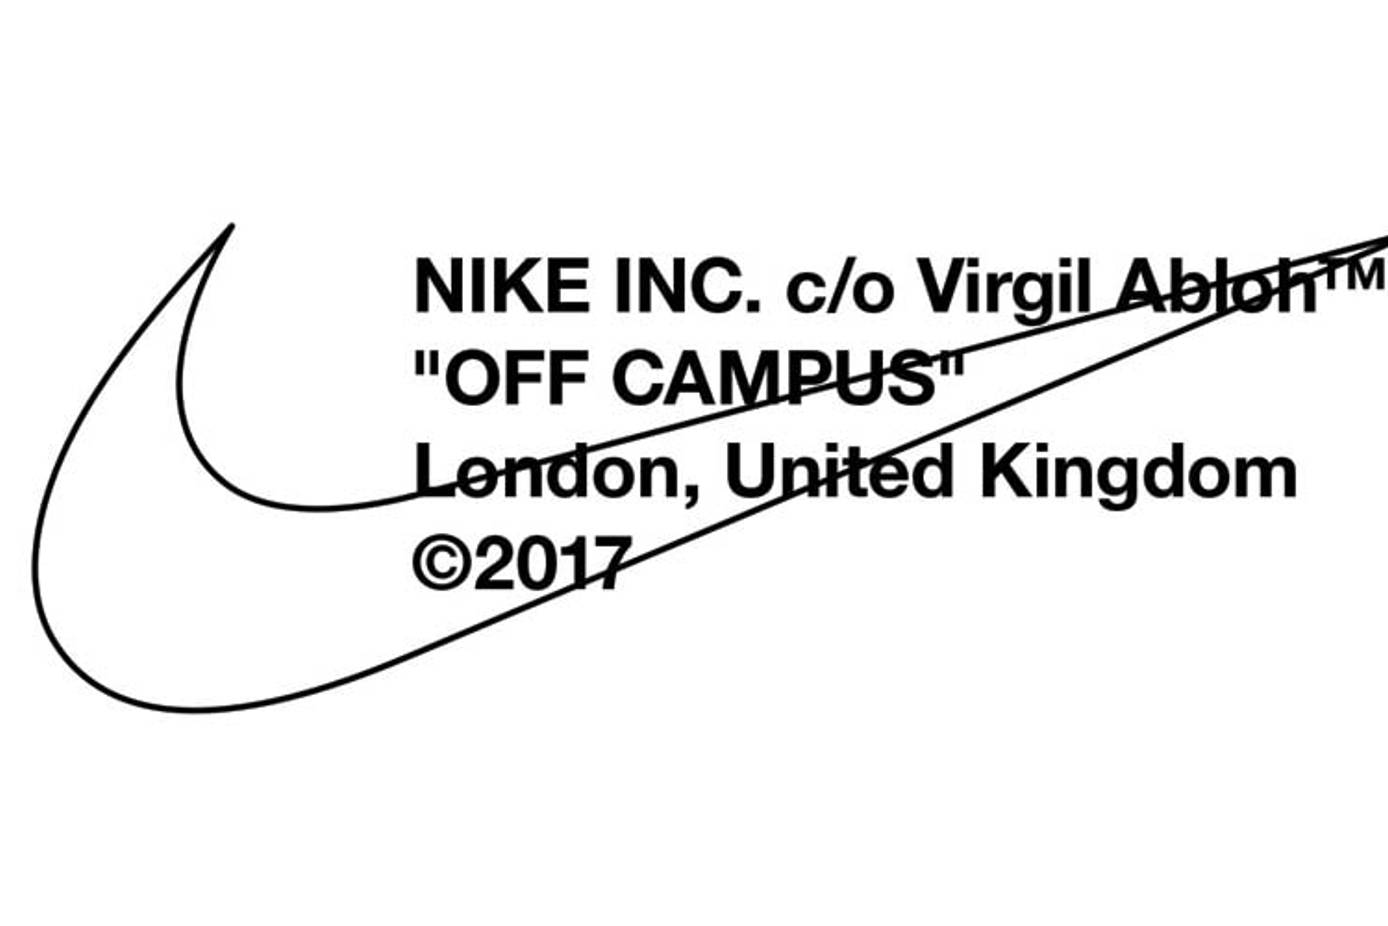 Nike announce “Off-Campus” London